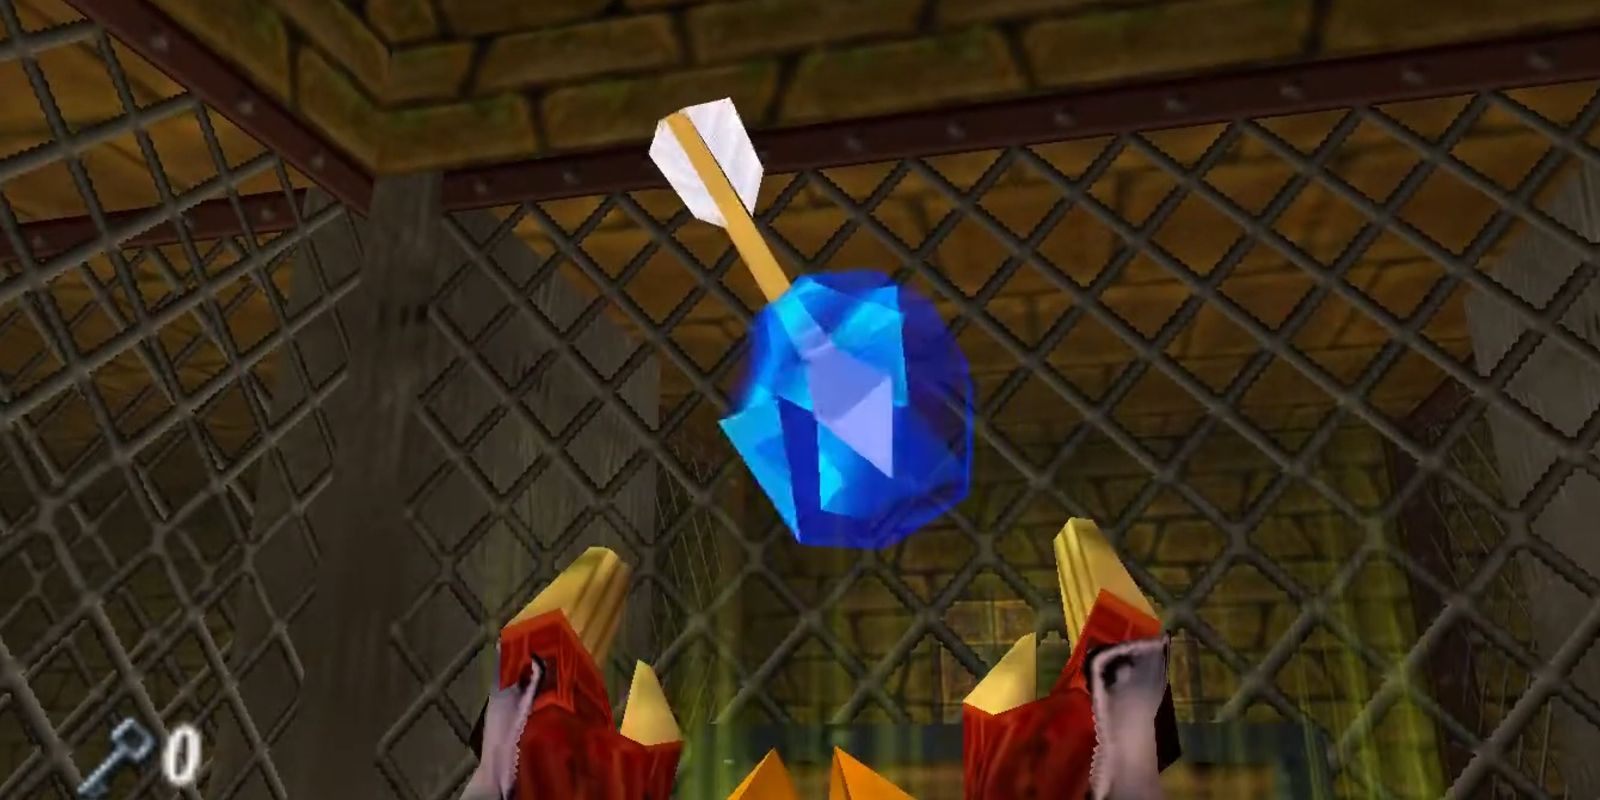 Link holding up the Ice Arrow in The Legend Of Zelda: Ocarina Of Time